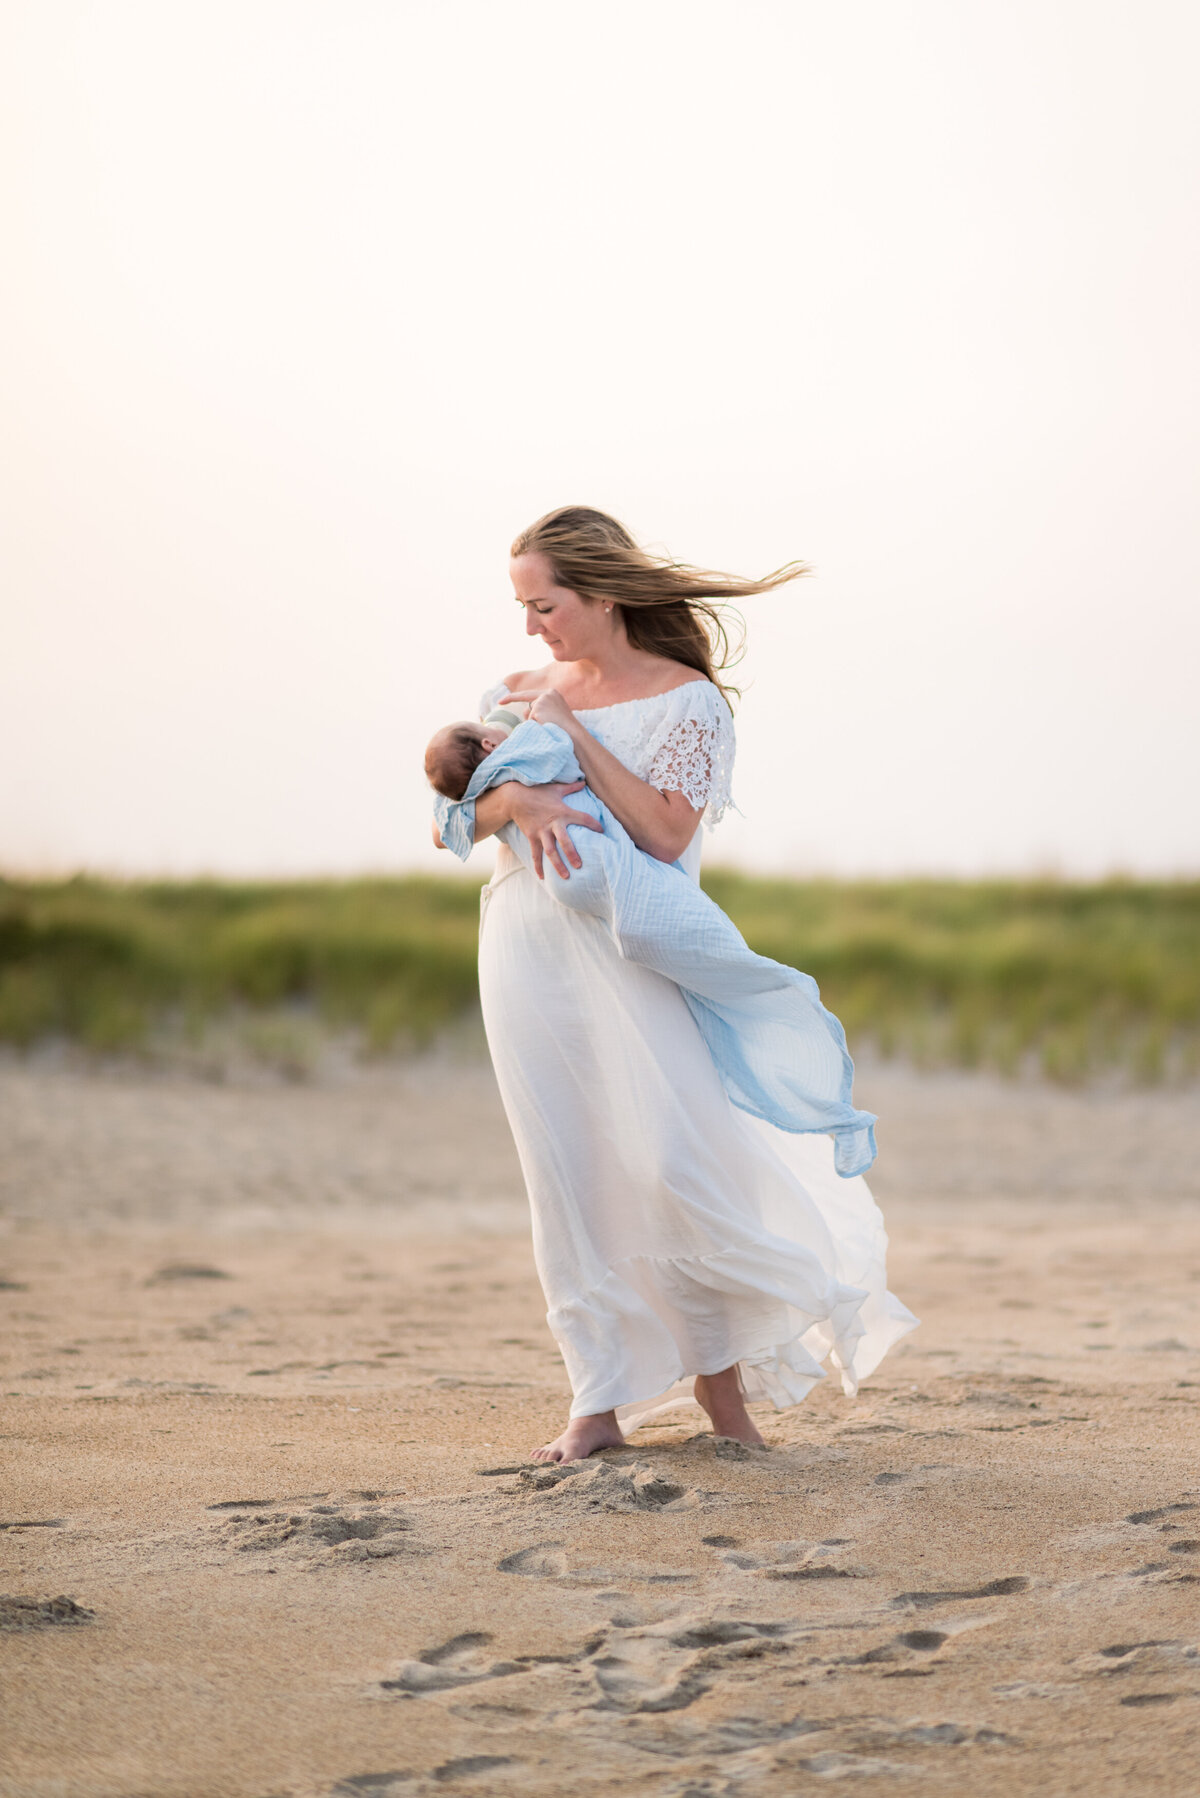 Boston-Newborn-photographer-family-photography-Bella-Wang-Photography-outdoor-baby-beach-session-21